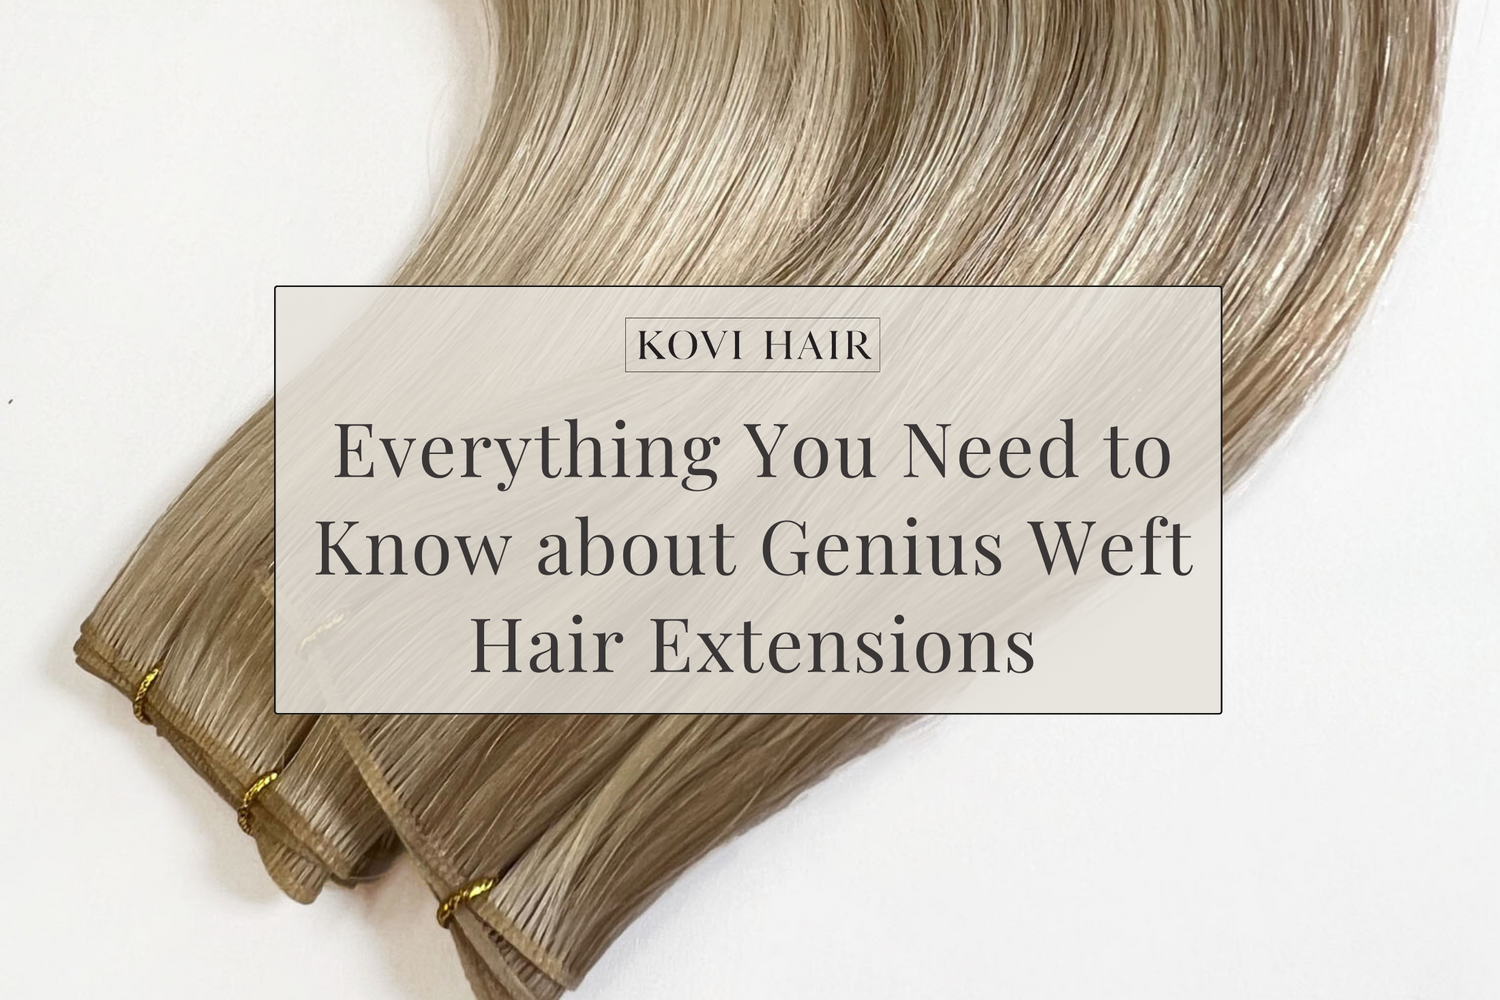 Everything You Need to Know about Genius Weft Hair Extensions – KOVI HAIR